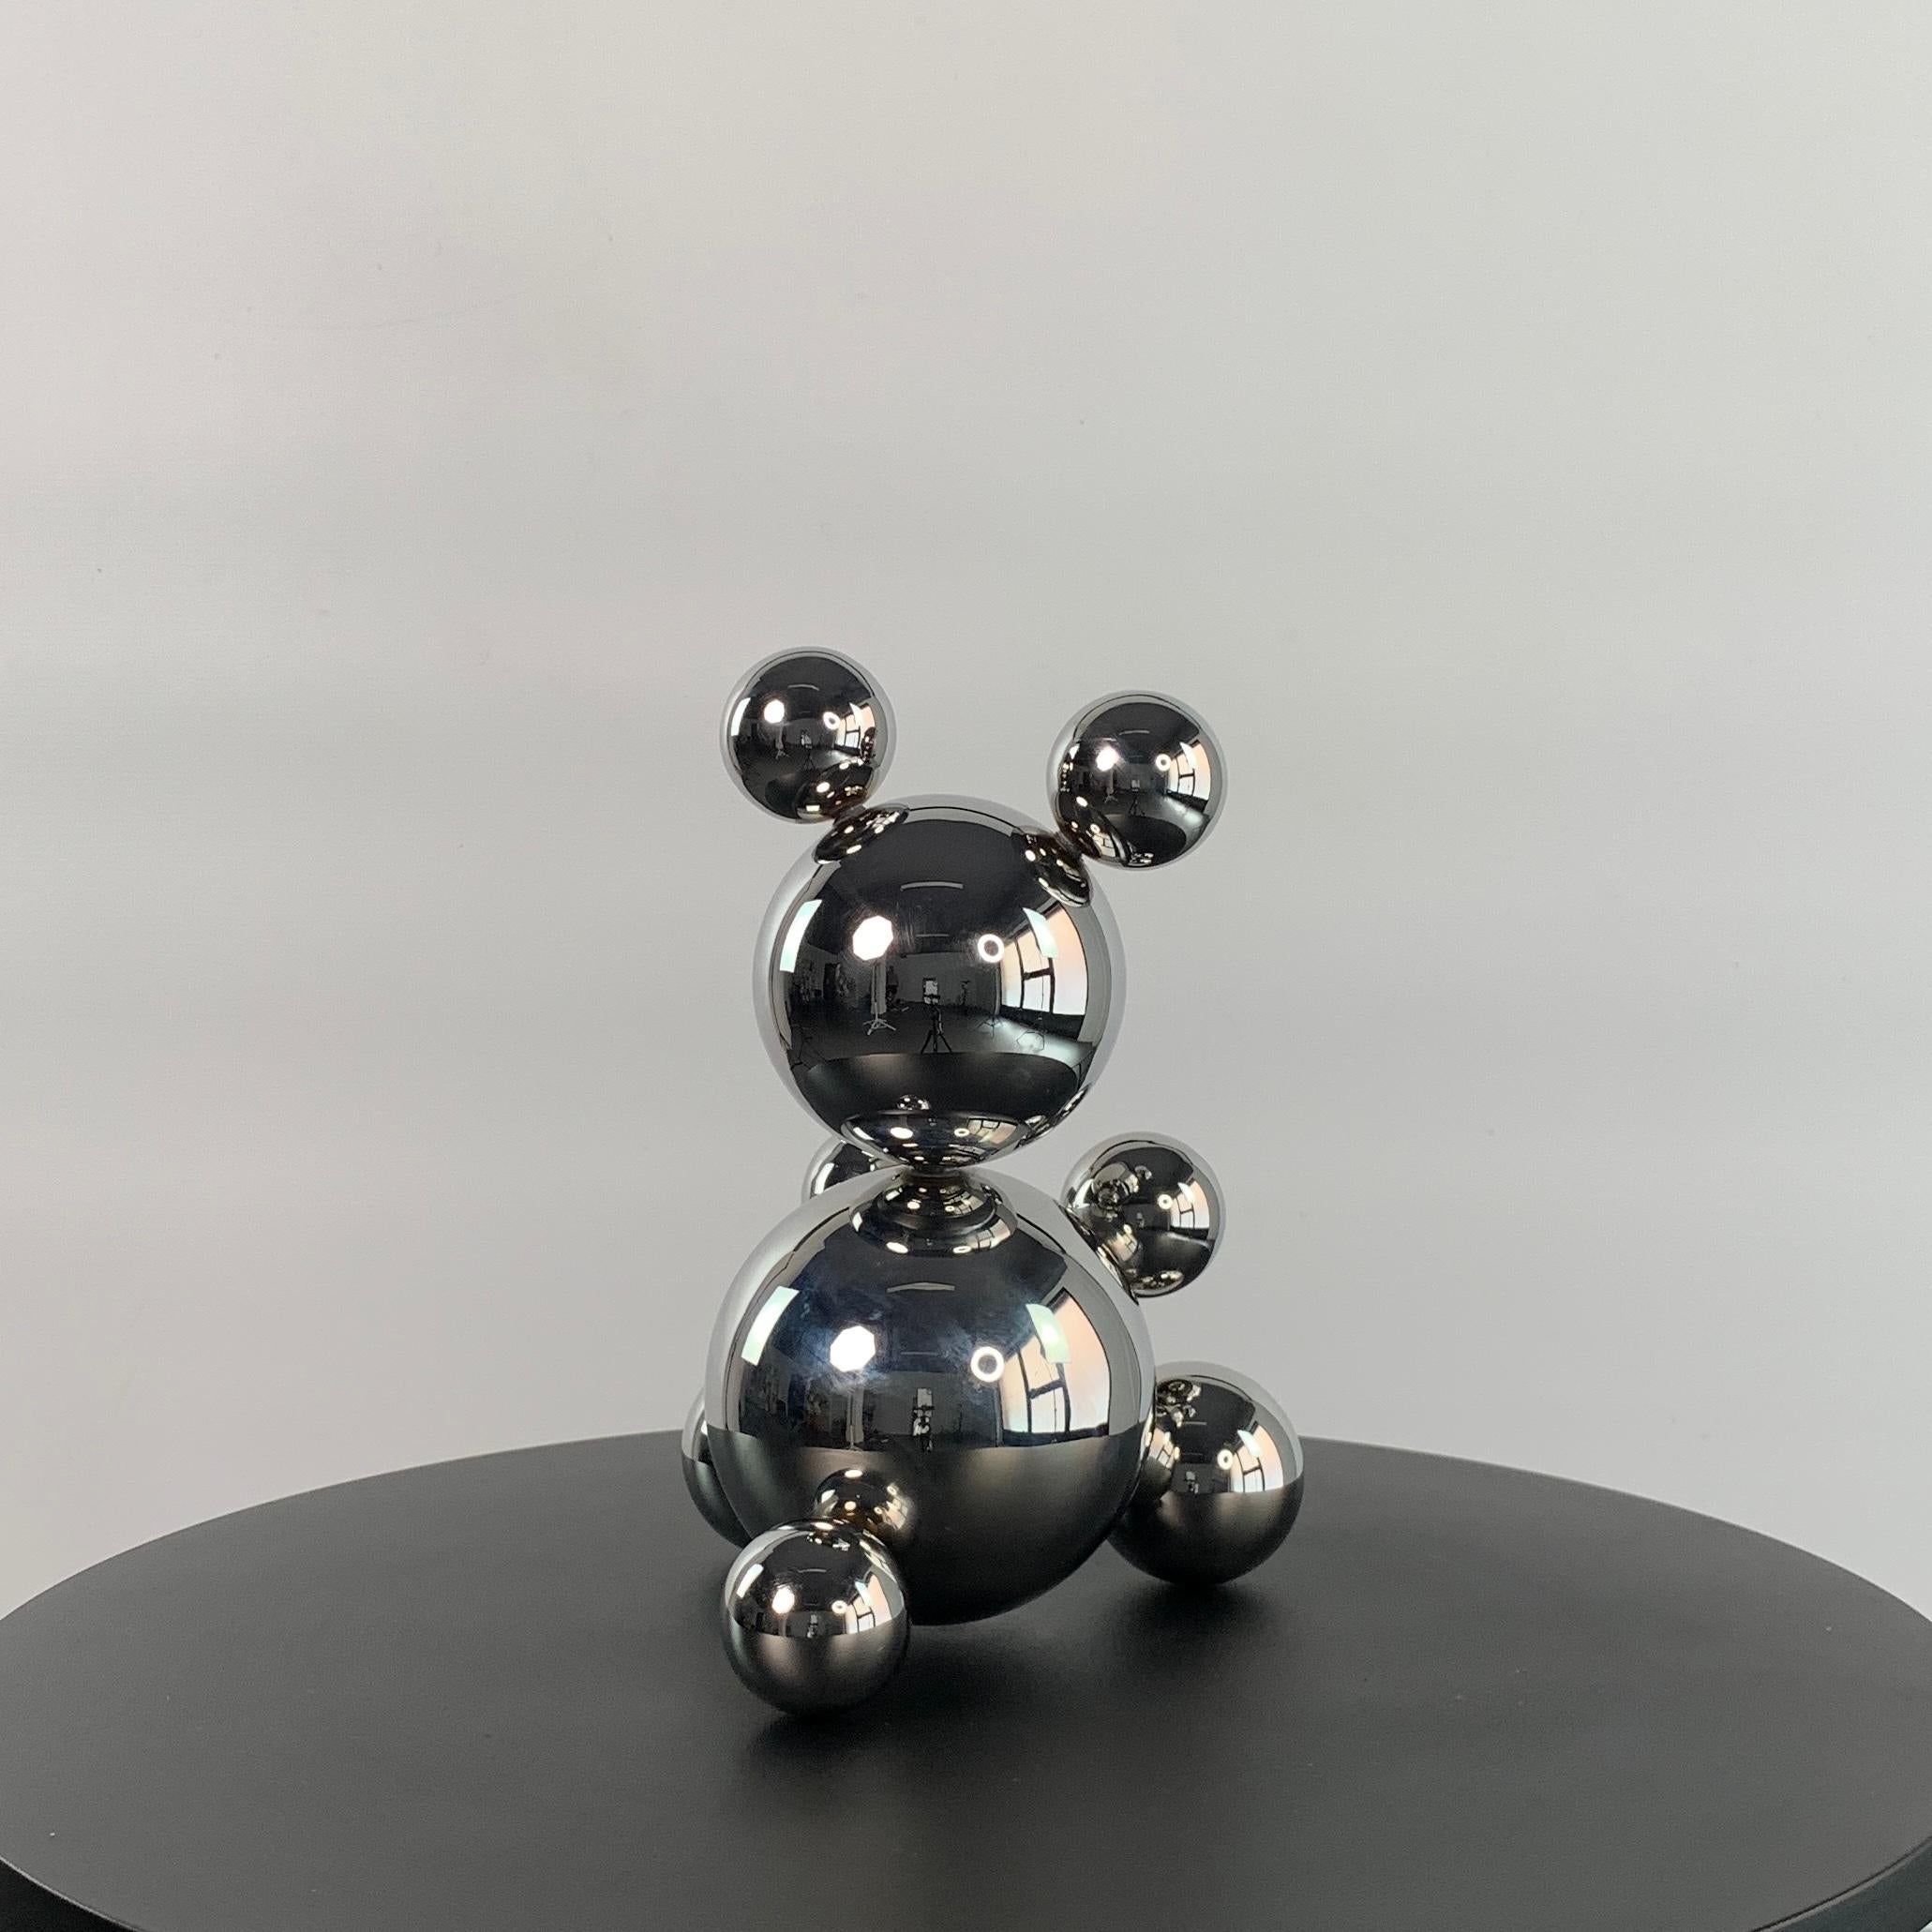 Made in Spain, 2024.
A simple form builds a complex one. In our approach, we go from the opposite, representing complex things in simple forms. So, our bear consists of only 9 simple steel balls, but this minimalism does not stop making him a bear.